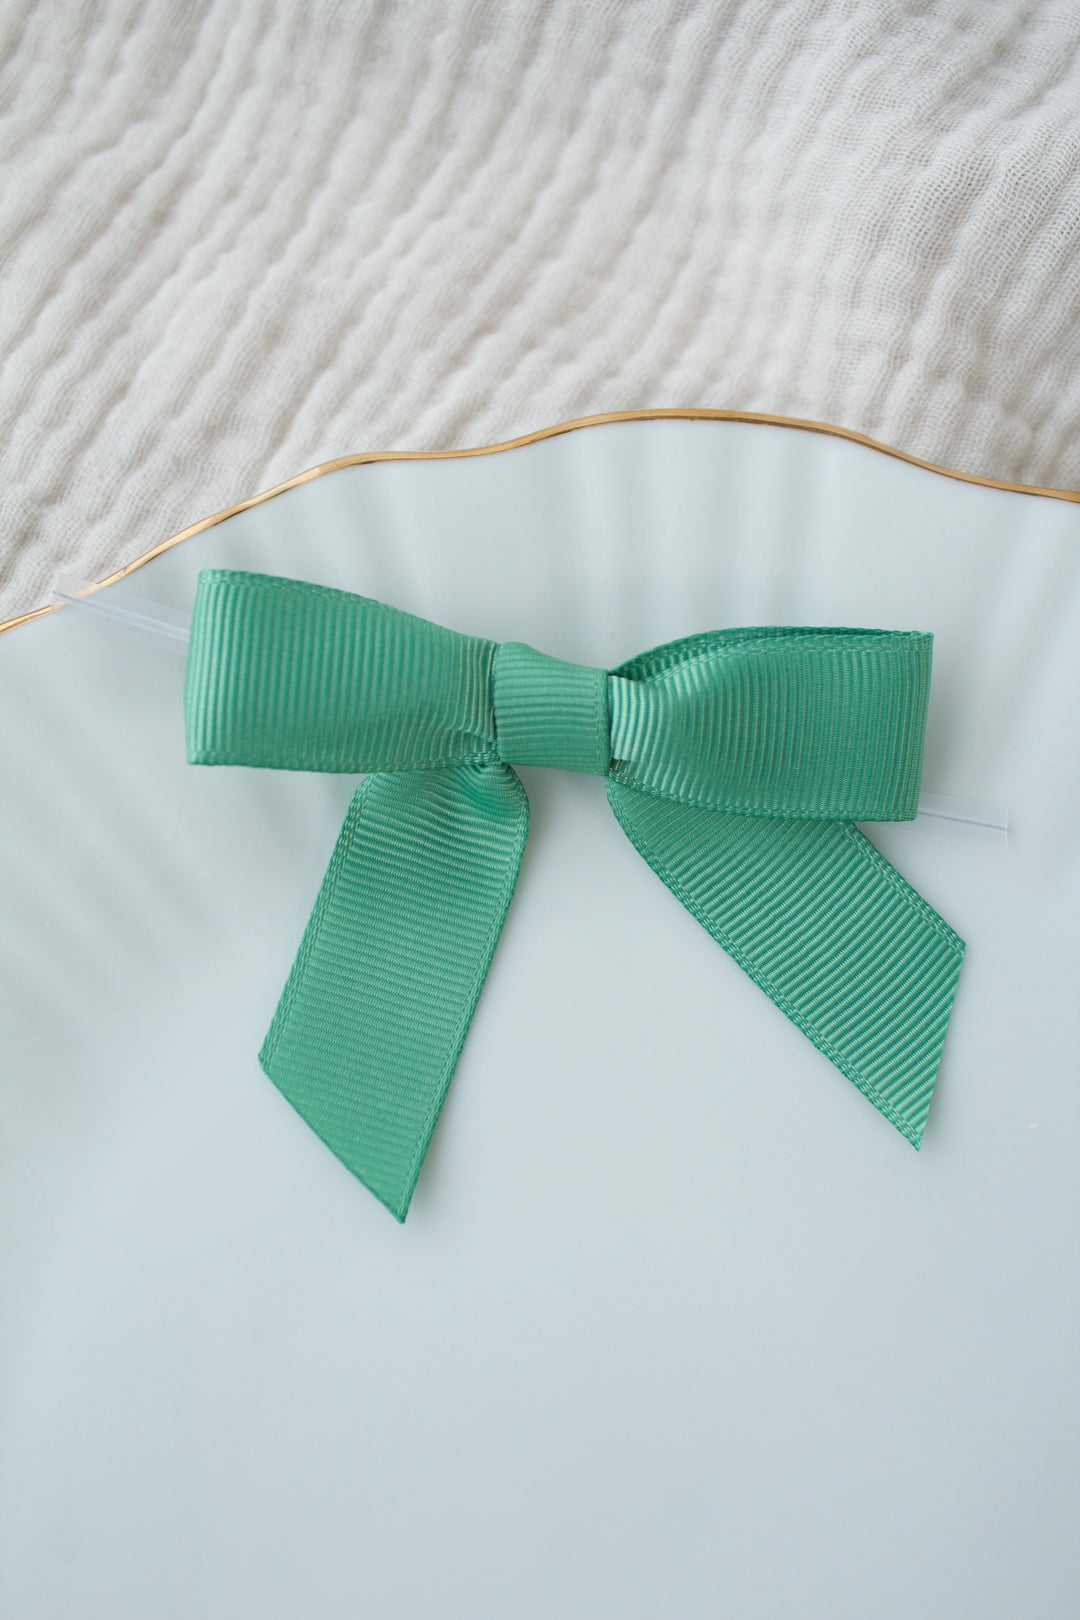 Green - Grosgrains pre-tied bows (20pcs) with clear twist tie